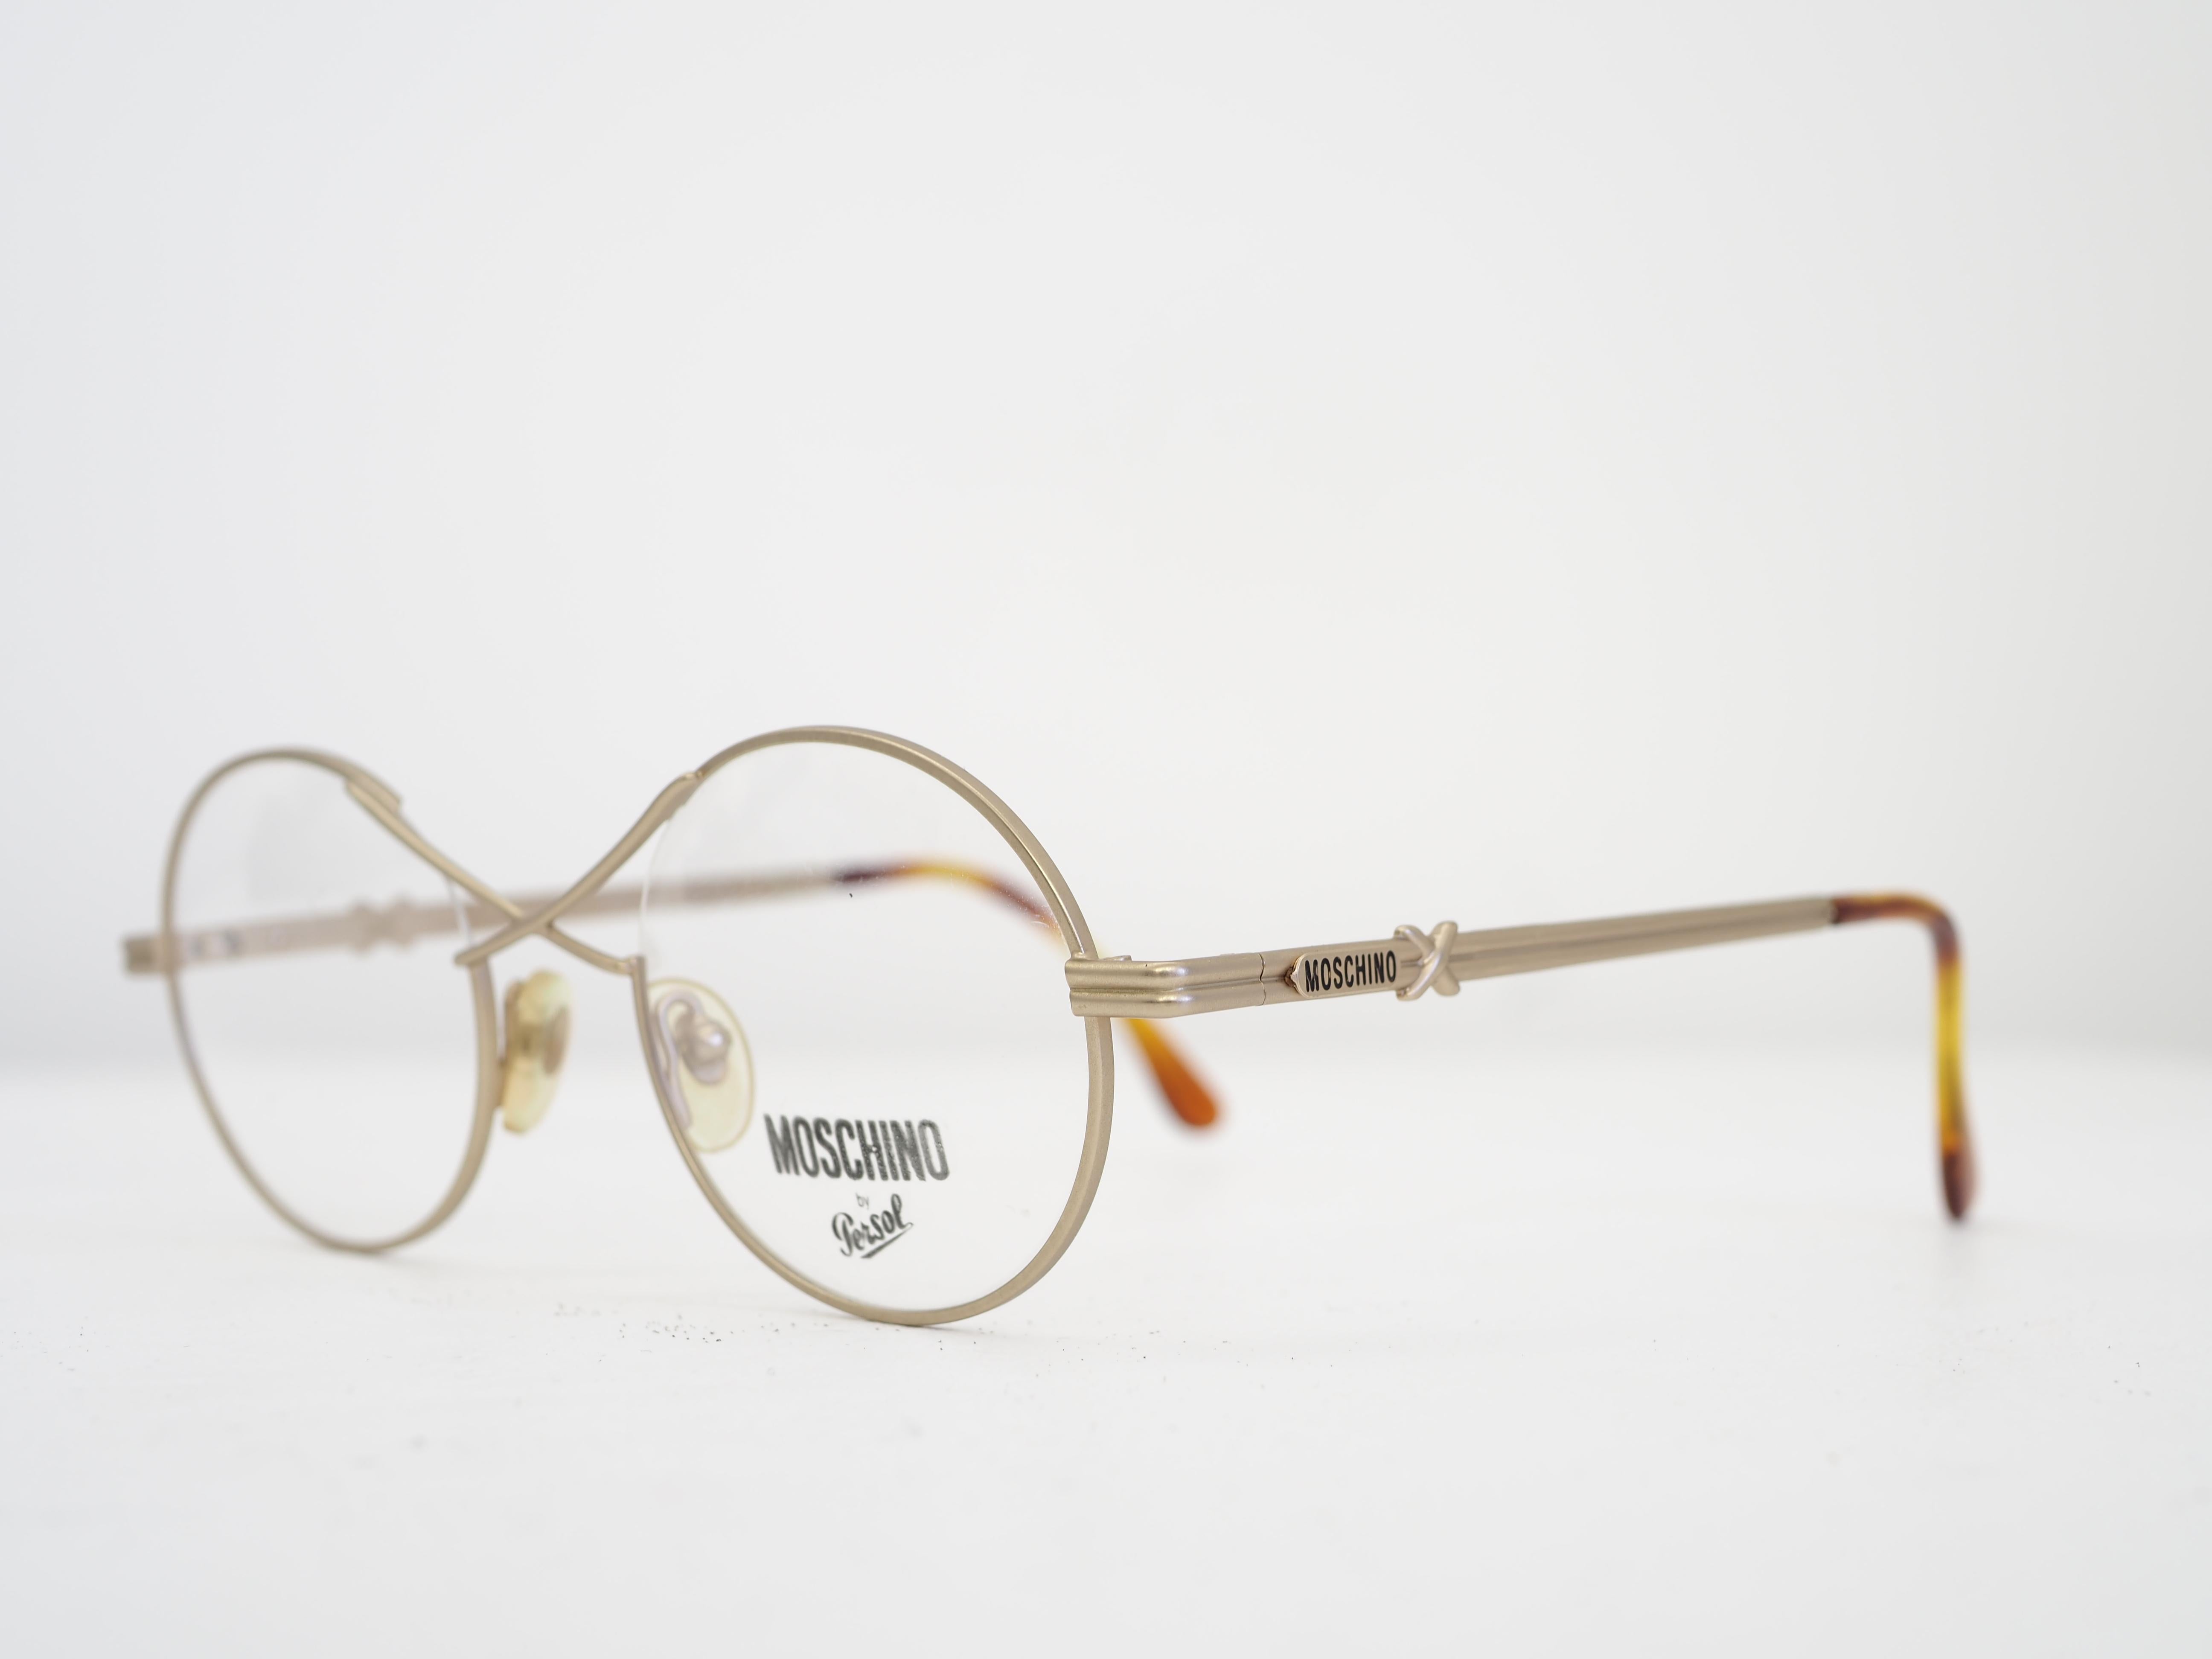 Moschino vintage frame  In Excellent Condition For Sale In Capri, IT